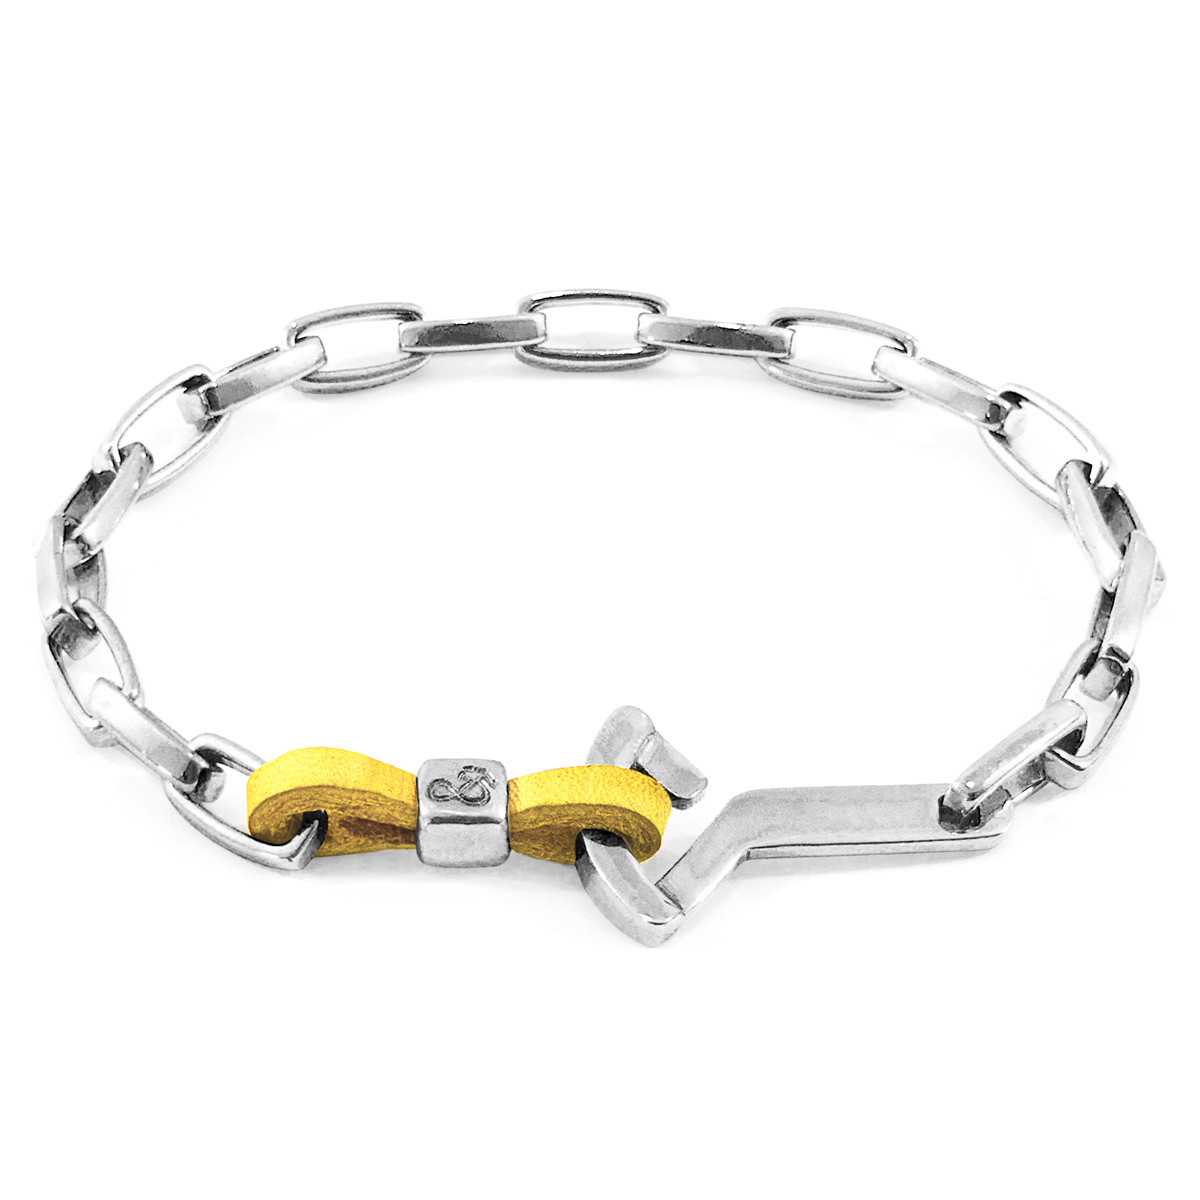 Anchor & Crew Mustard Yellow Frigate Silver and Flat Leather Bracelet